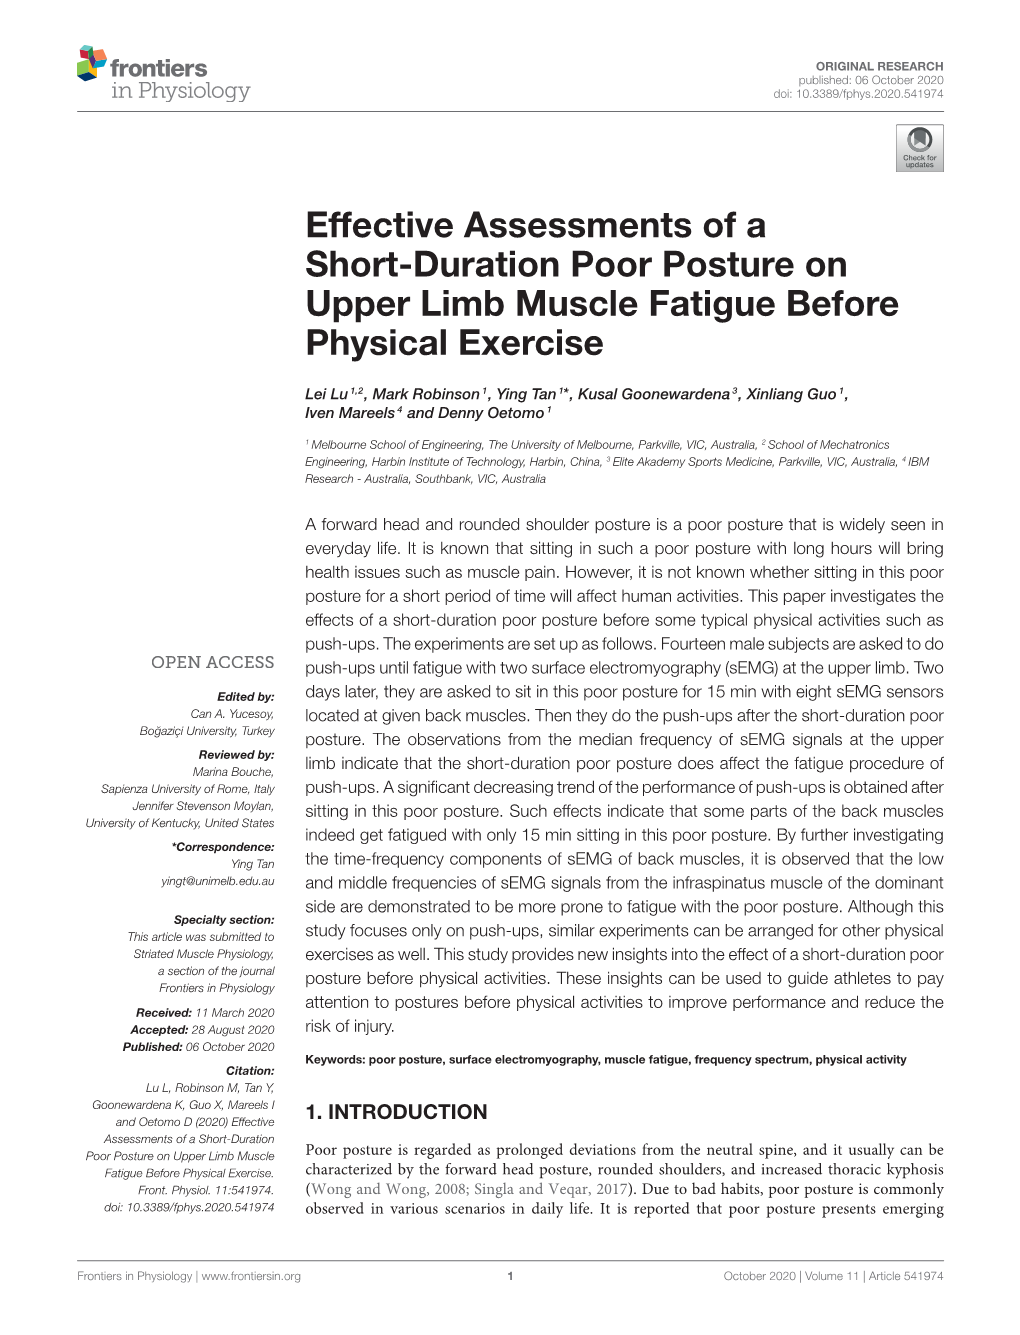 Effective Assessments of a Short-Duration Poor Posture on Upper Limb Muscle Fatigue Before Physical Exercise